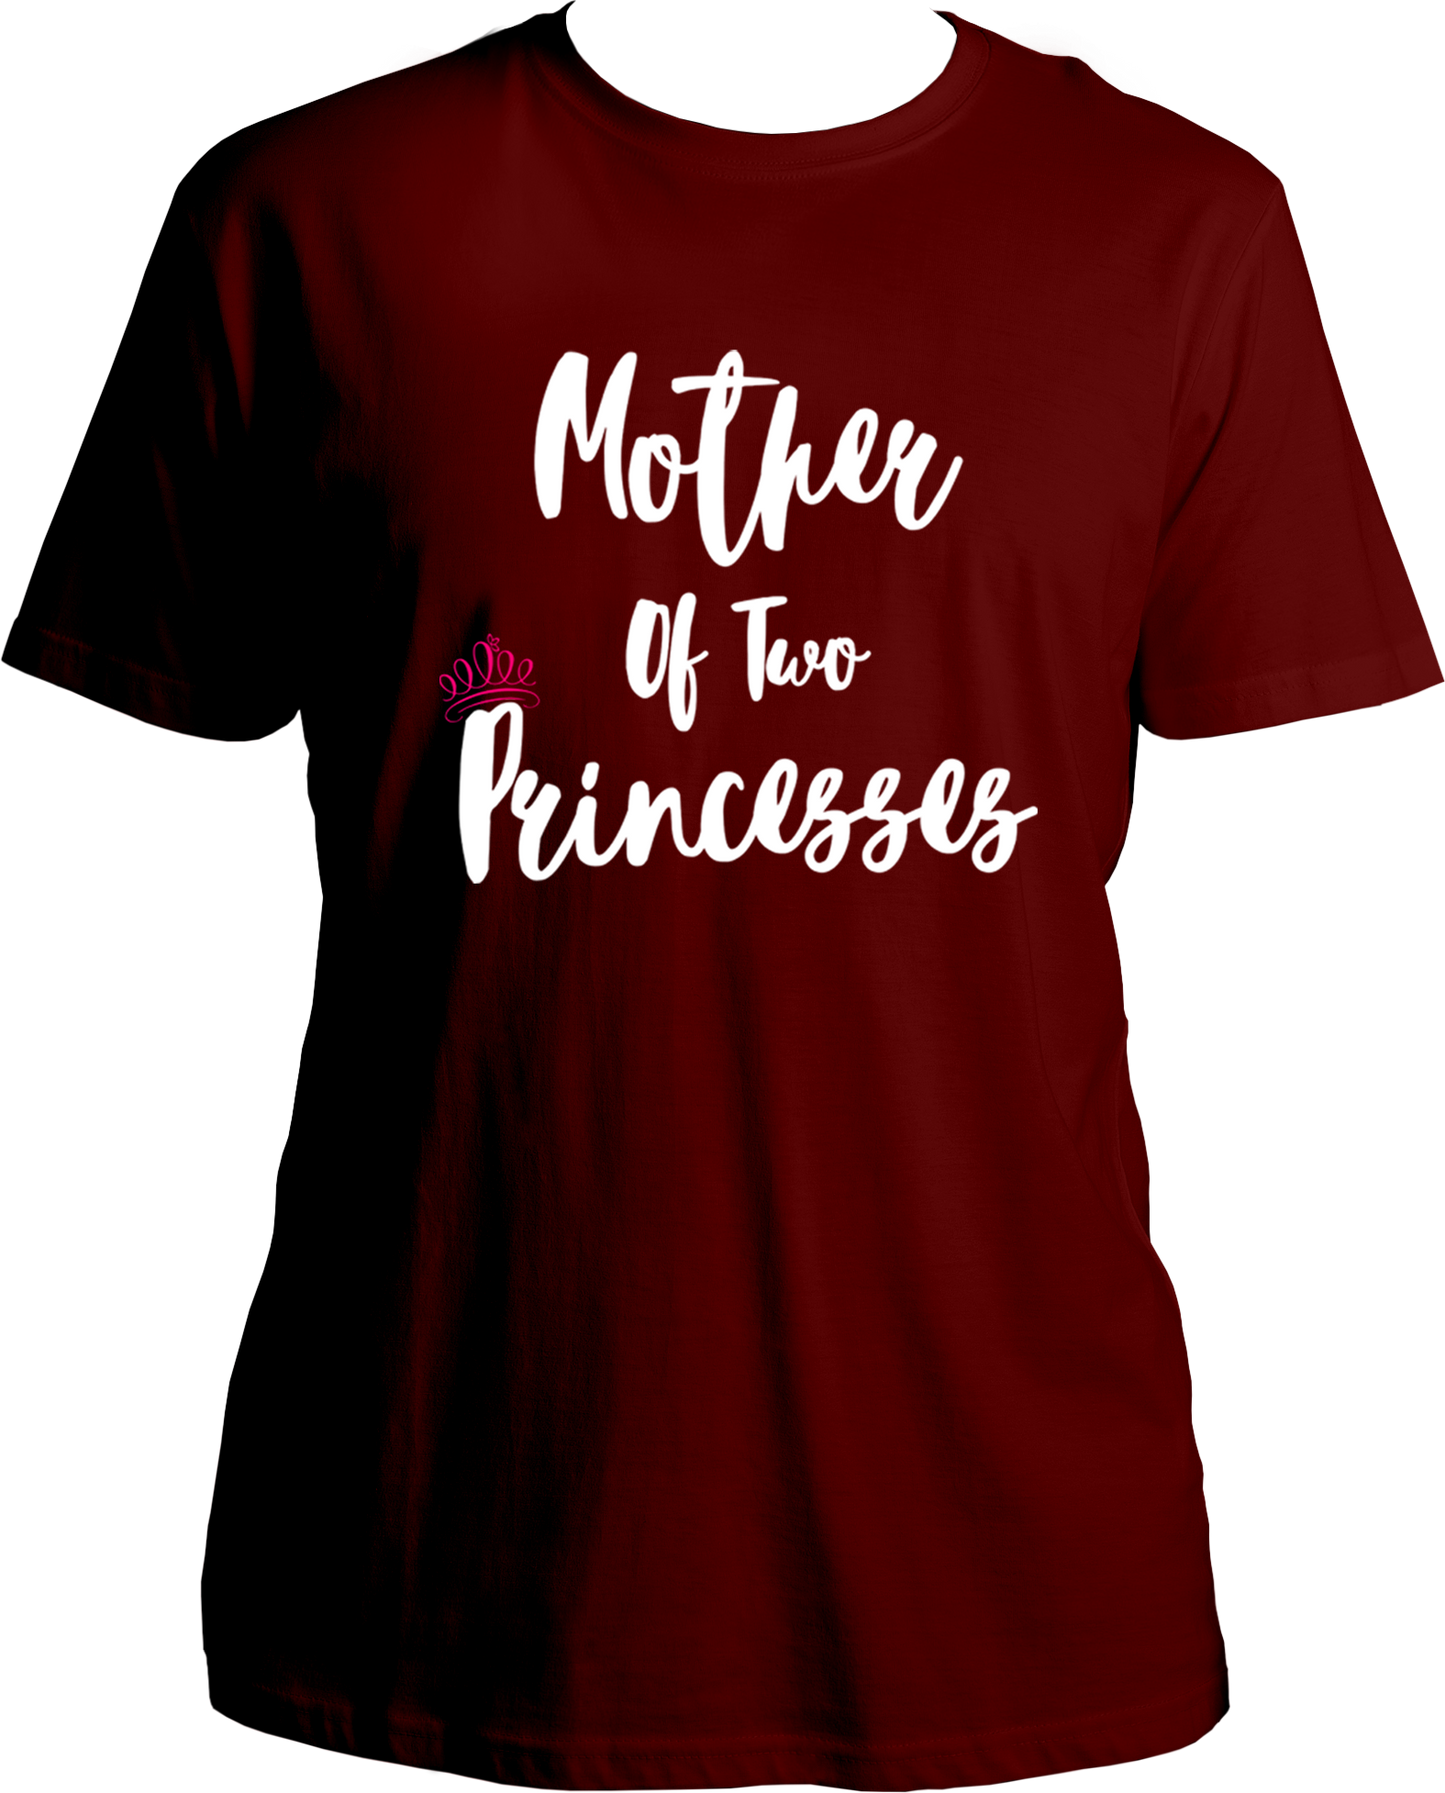 Show your love for the moms in your life with this special Mother Of A Princess Unisex T-Shirt! It's the perfect way to celebrate and honor moms on this Mother's Day. With a unique design made specifically for moms of princesses, it's sure to bring a smile to any mom's face. Family t-shirts from Garrari